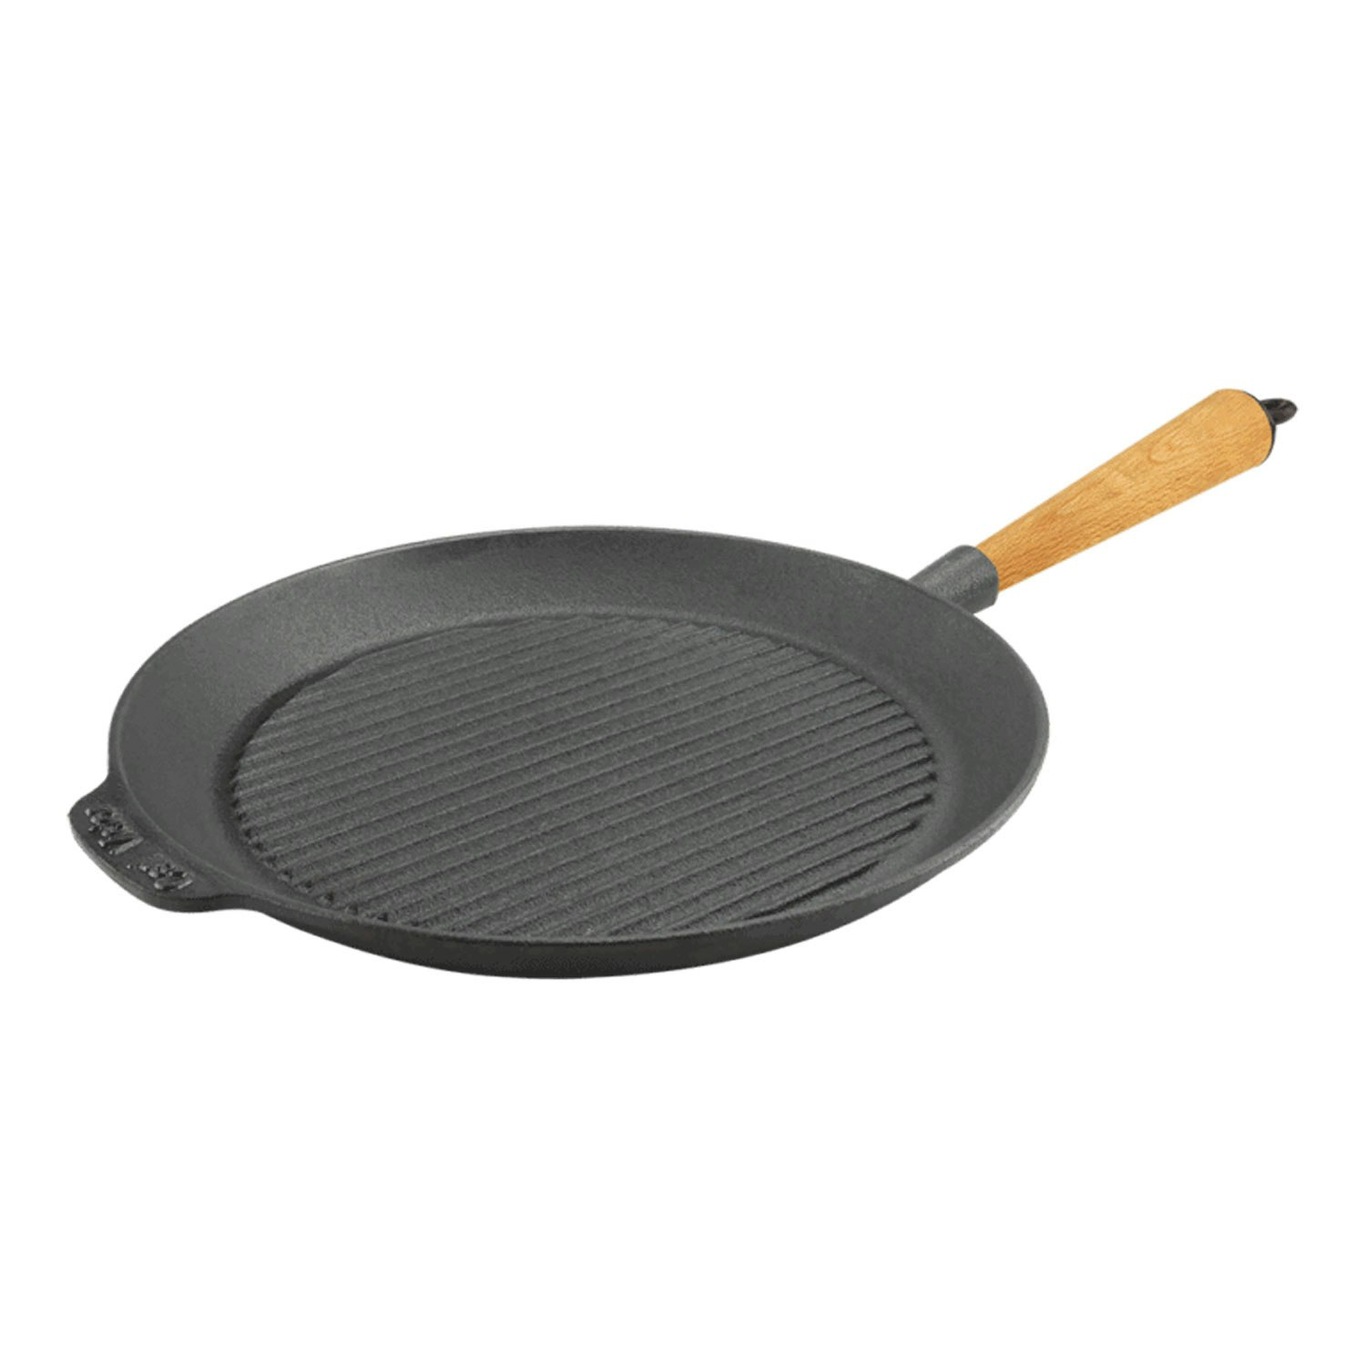 https://royaldesign.com/image/2/carl-victor-grill-pan-28-cm-with-handle-in-beech-1?w=800&quality=80